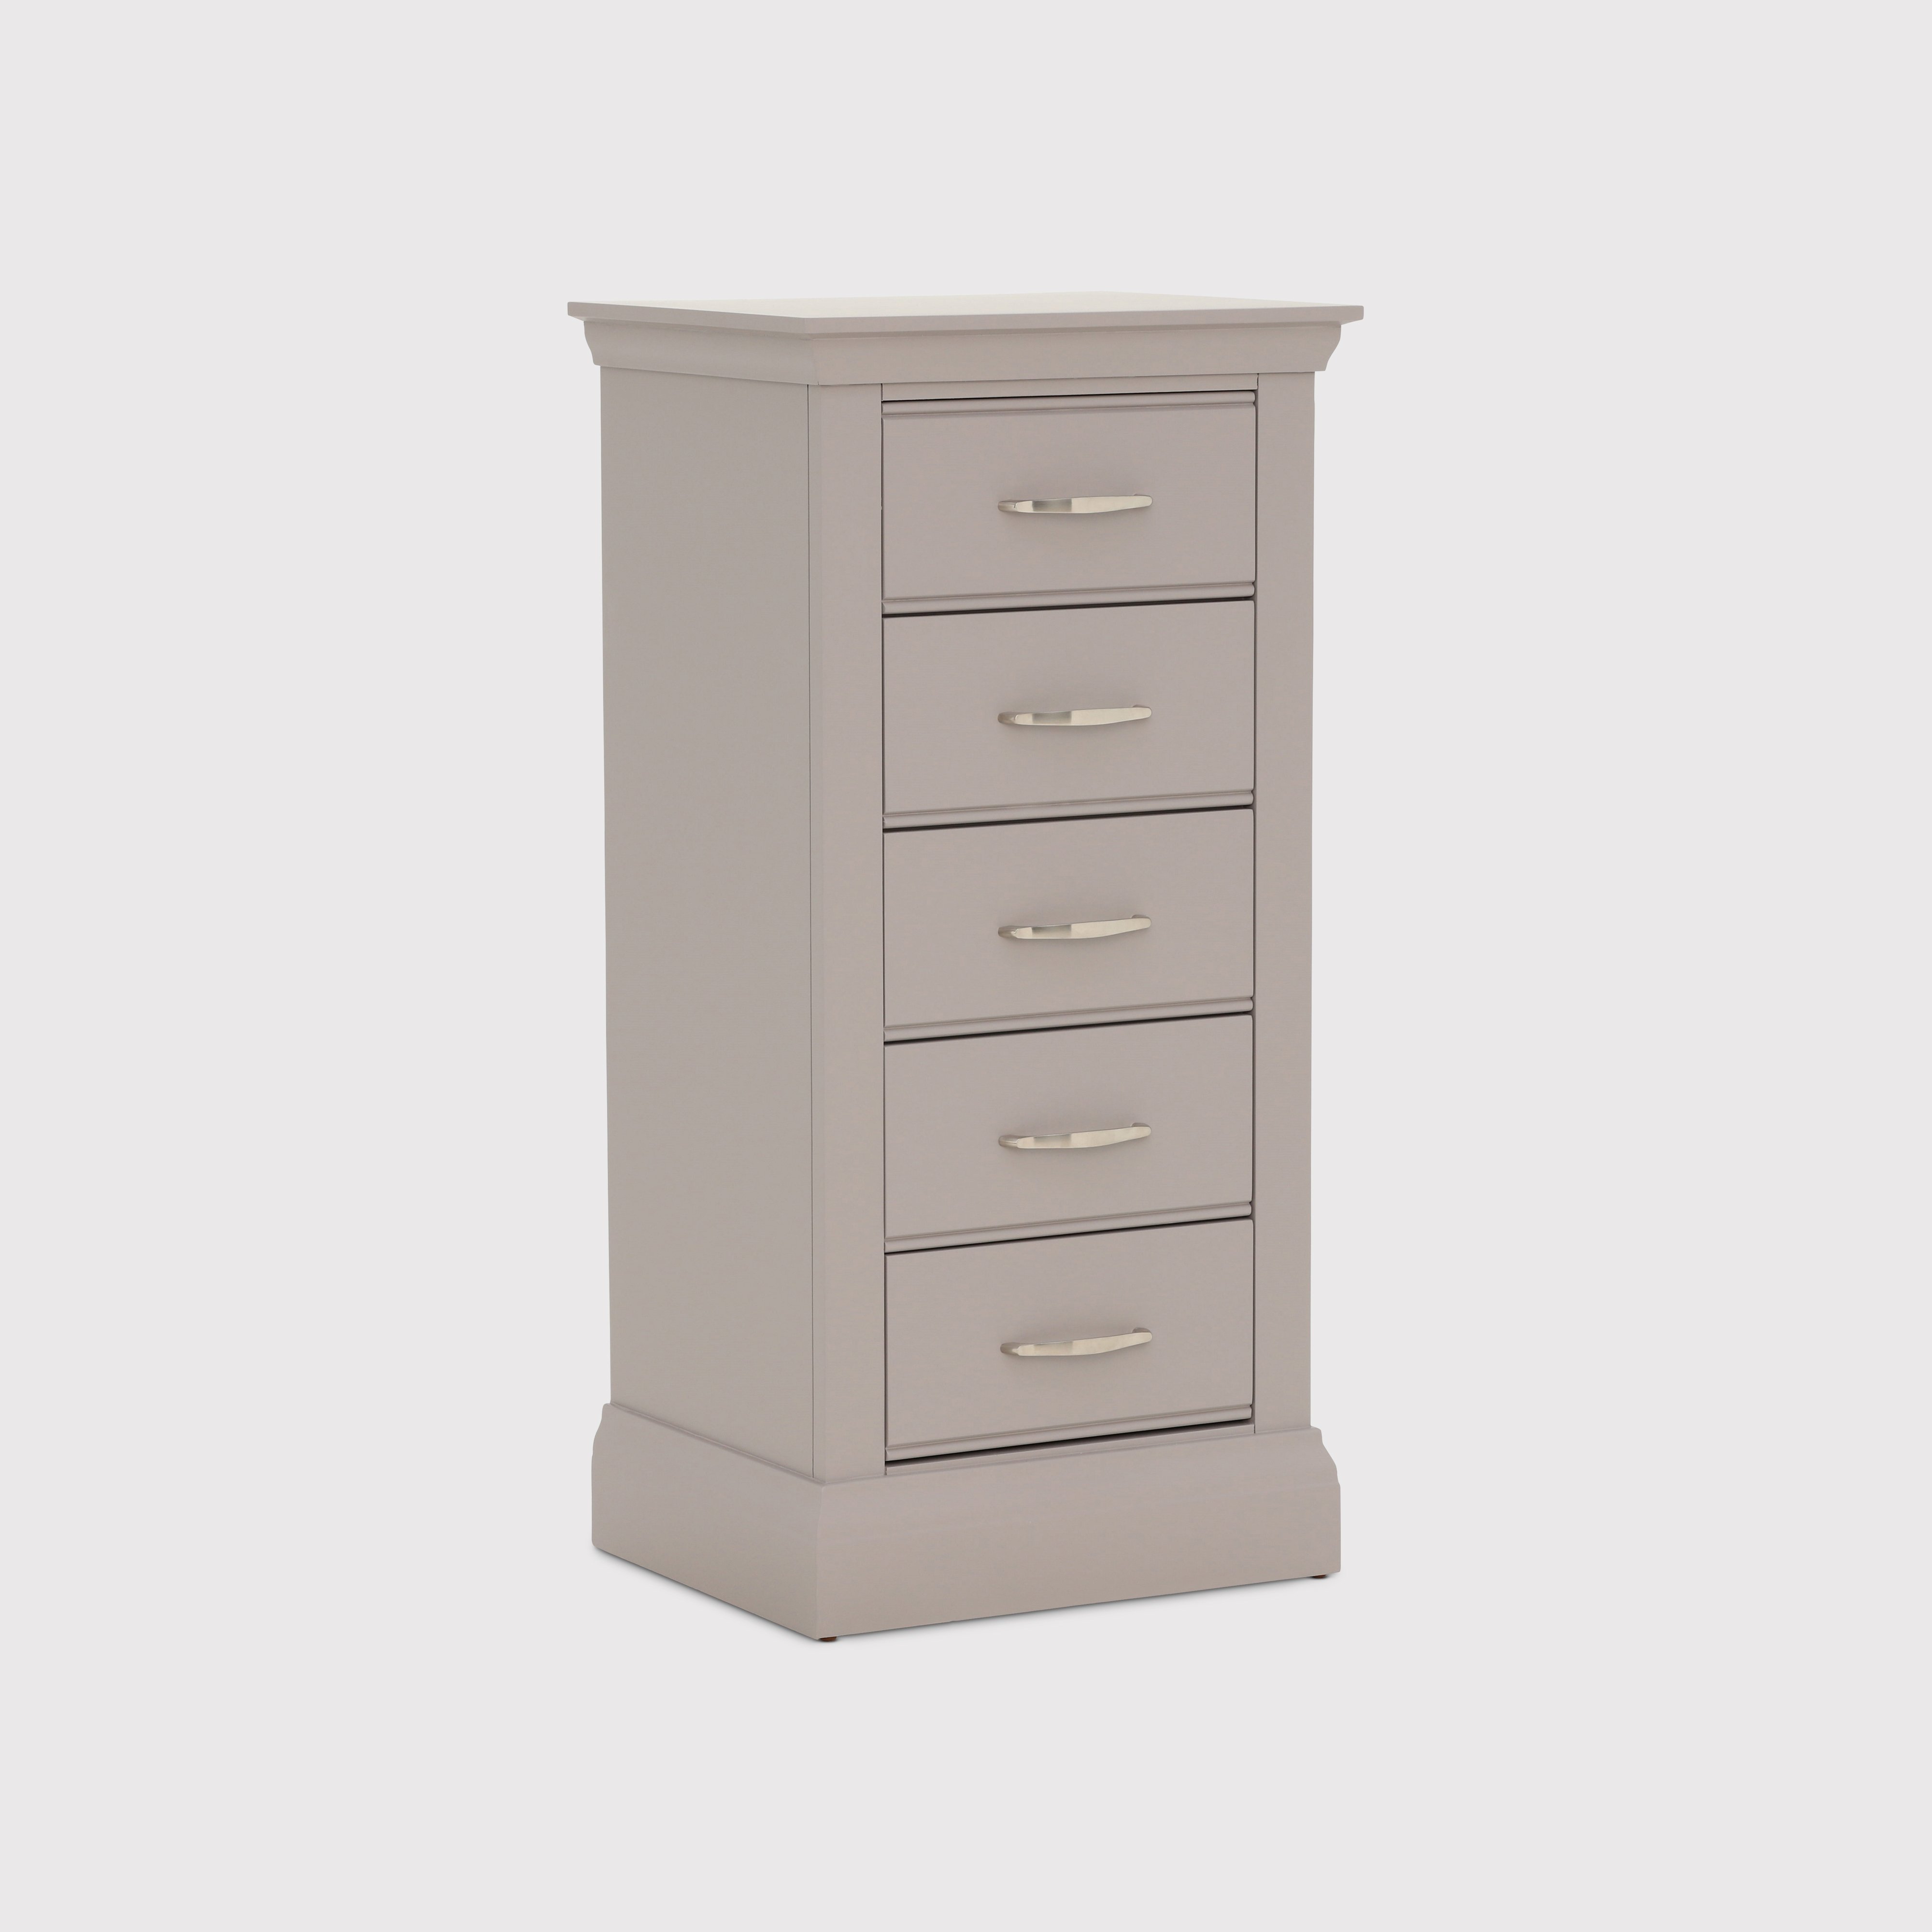 Photo of Helmsley 5 drawer tall chest in grey